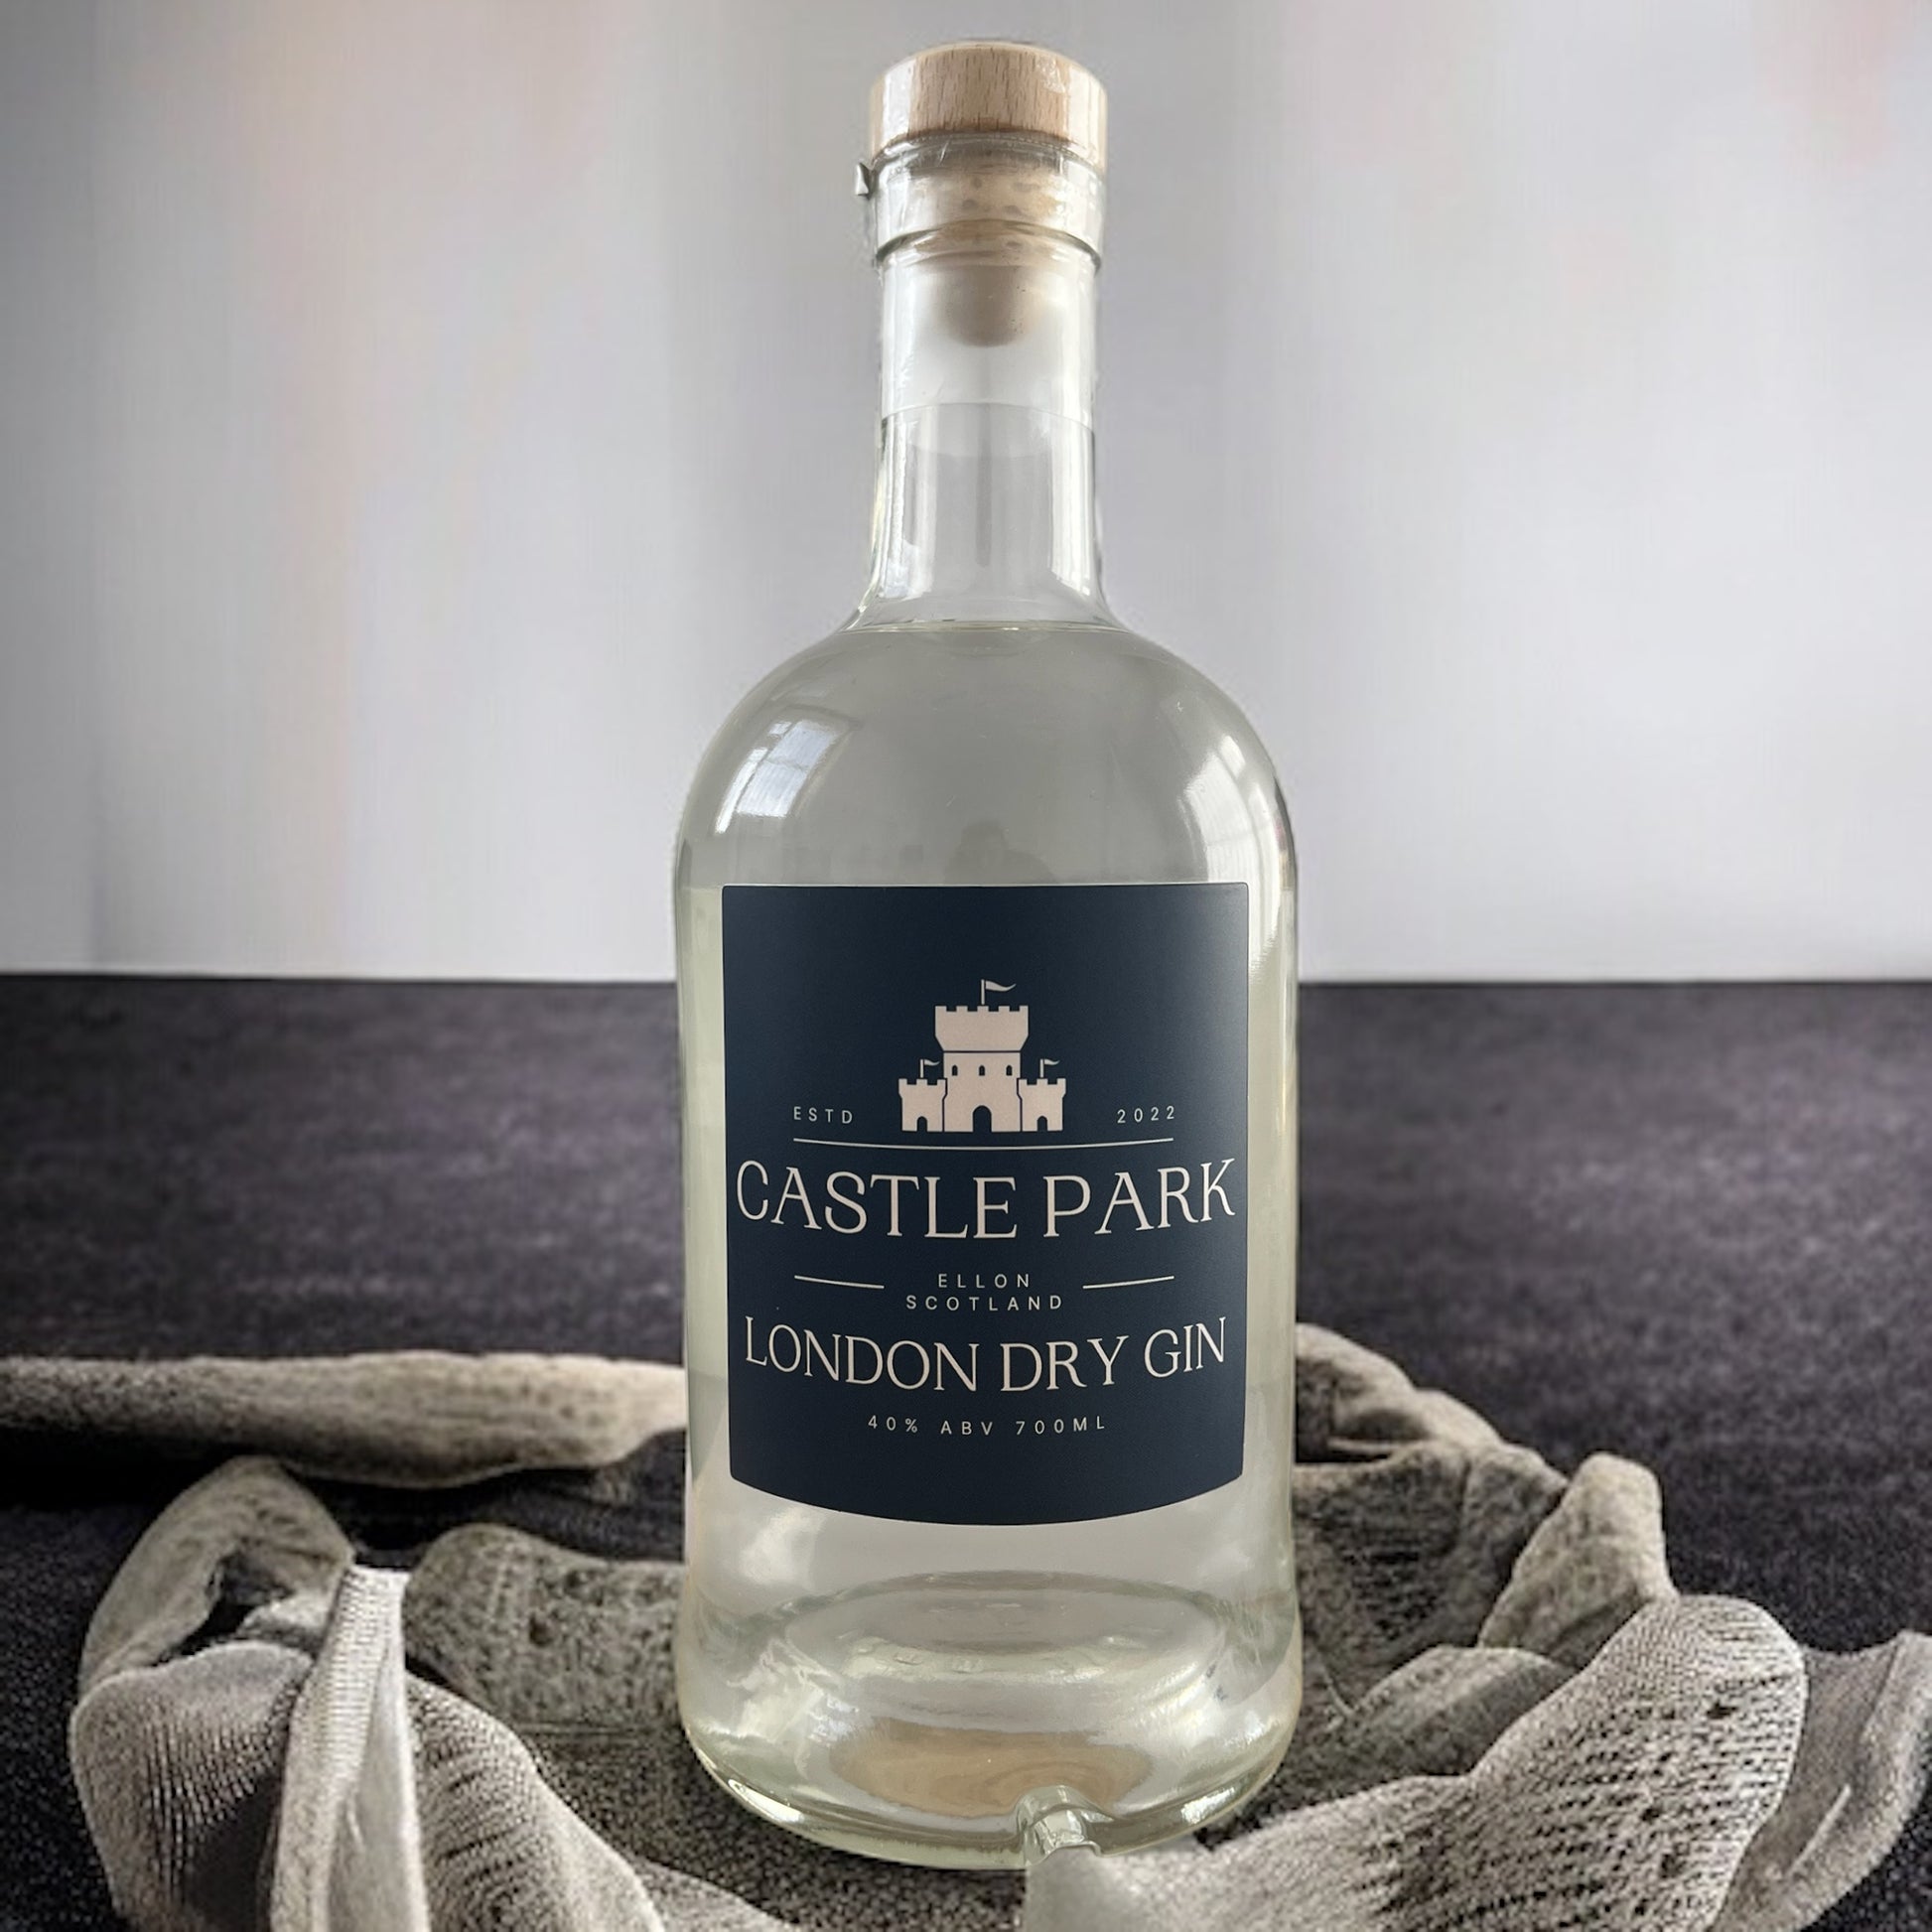 Castle Park London Dry Gin 40% 700ml on rocks with white and grey background